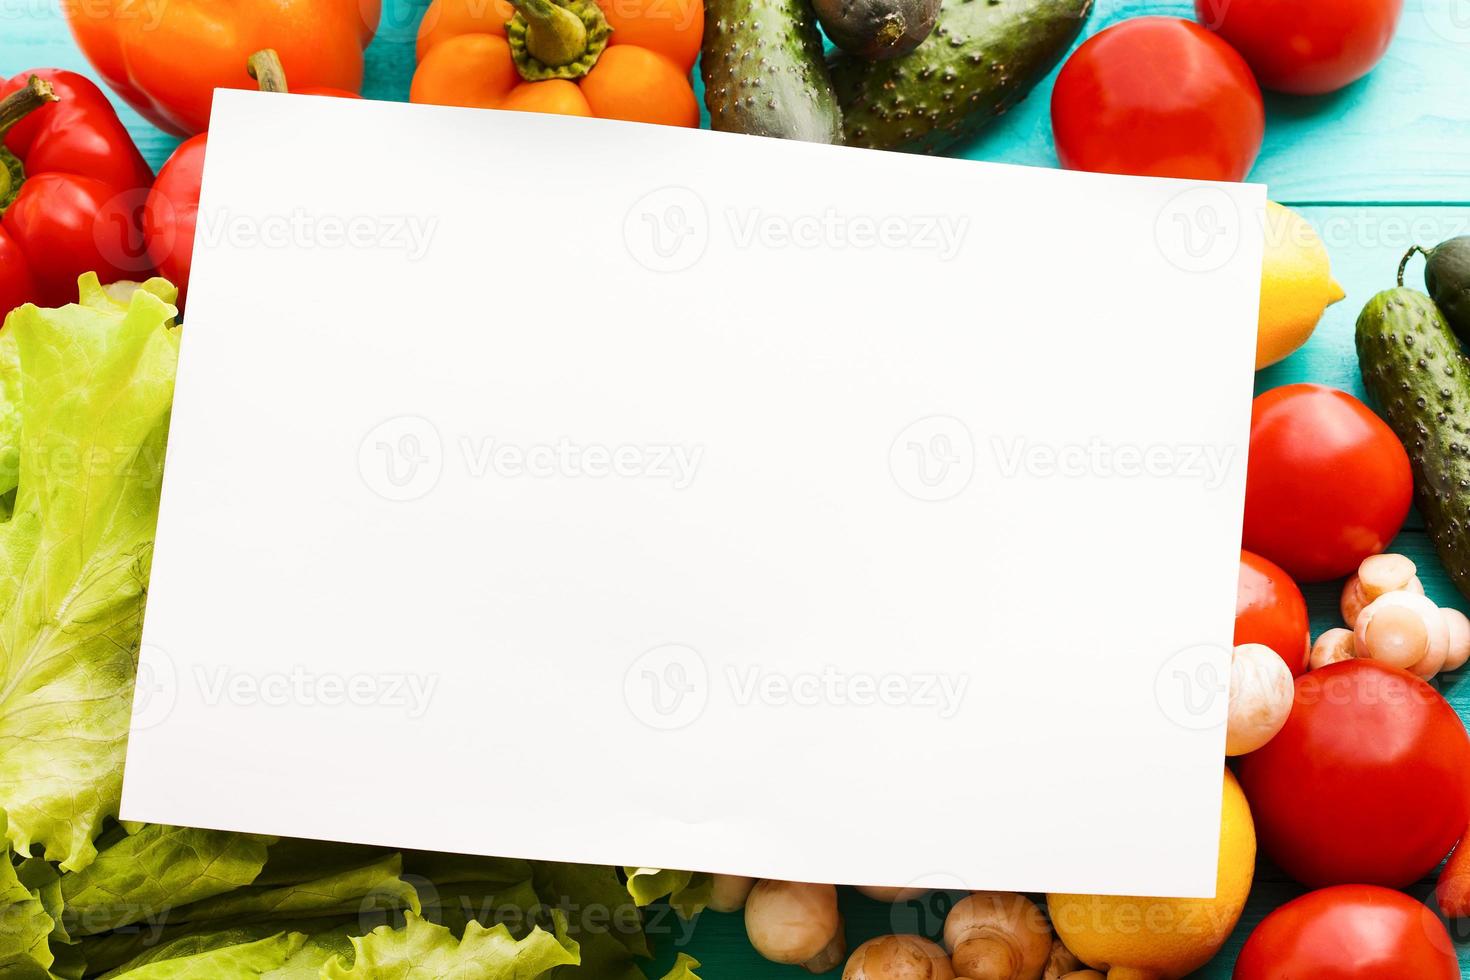 Different vegetables on kitchen table with recipe list and copy space. Top view photo